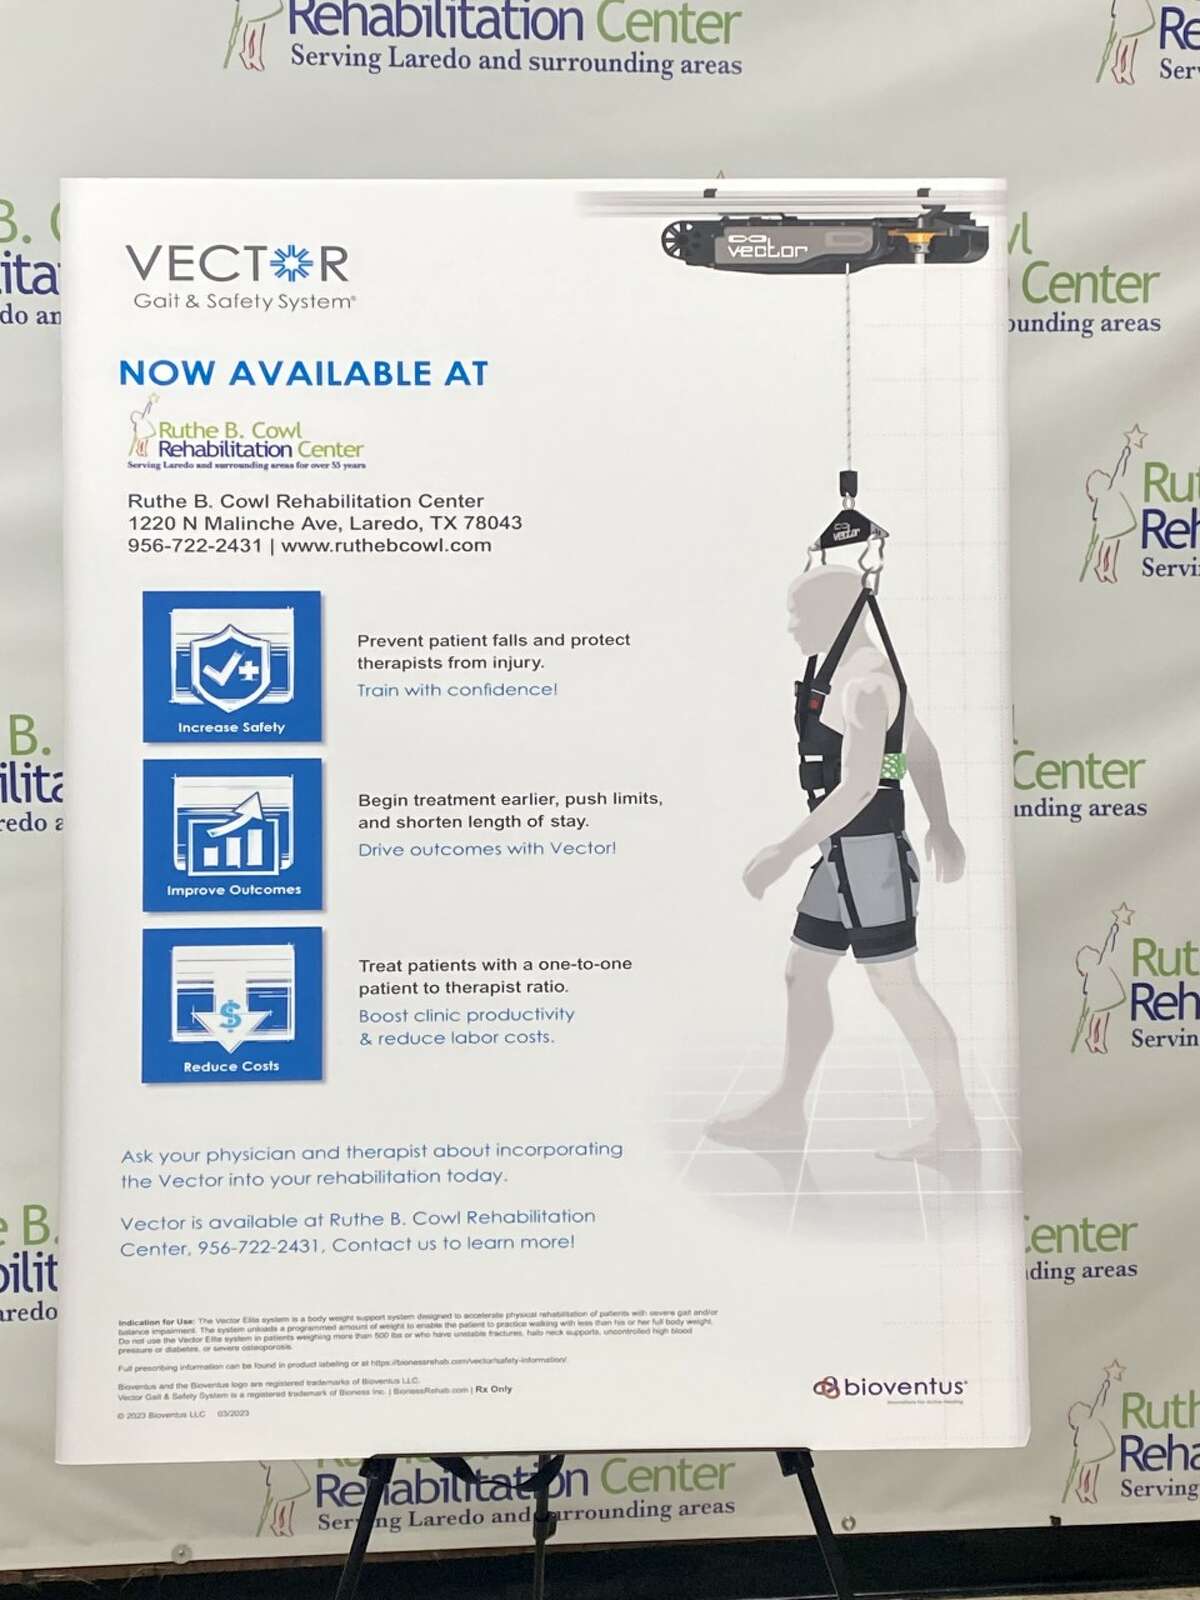 The Vector Gait & Safety System is an innovative rehabilitation therapy technology now available at the Ruthe B, Cowl Rehabilitation Center in Laredo and South Texas.